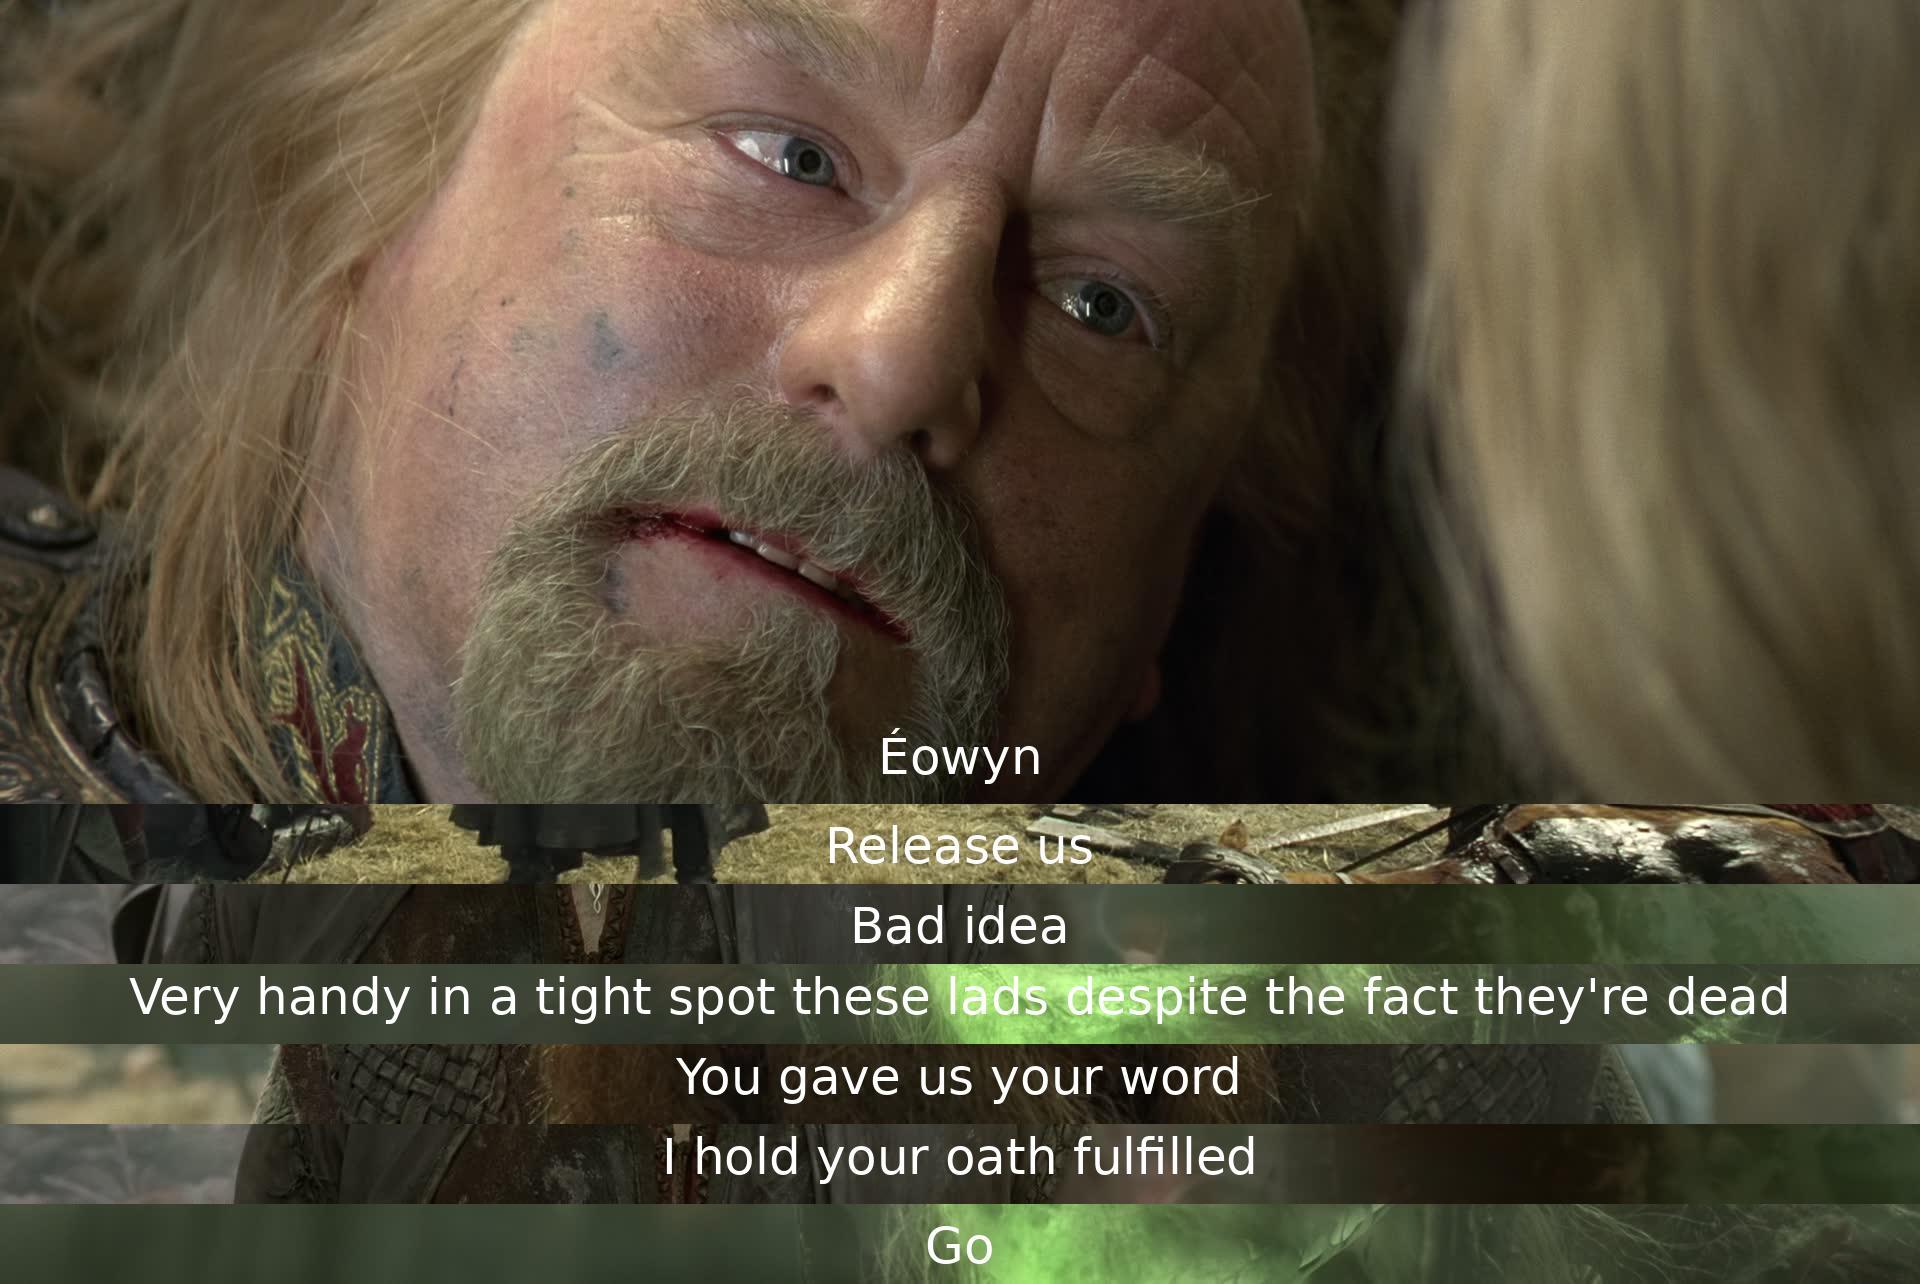 Éowyn asks for release, but it is deemed a bad idea. Despite being dead, they are useful. The oath is considered fulfilled, and they are allowed to go.